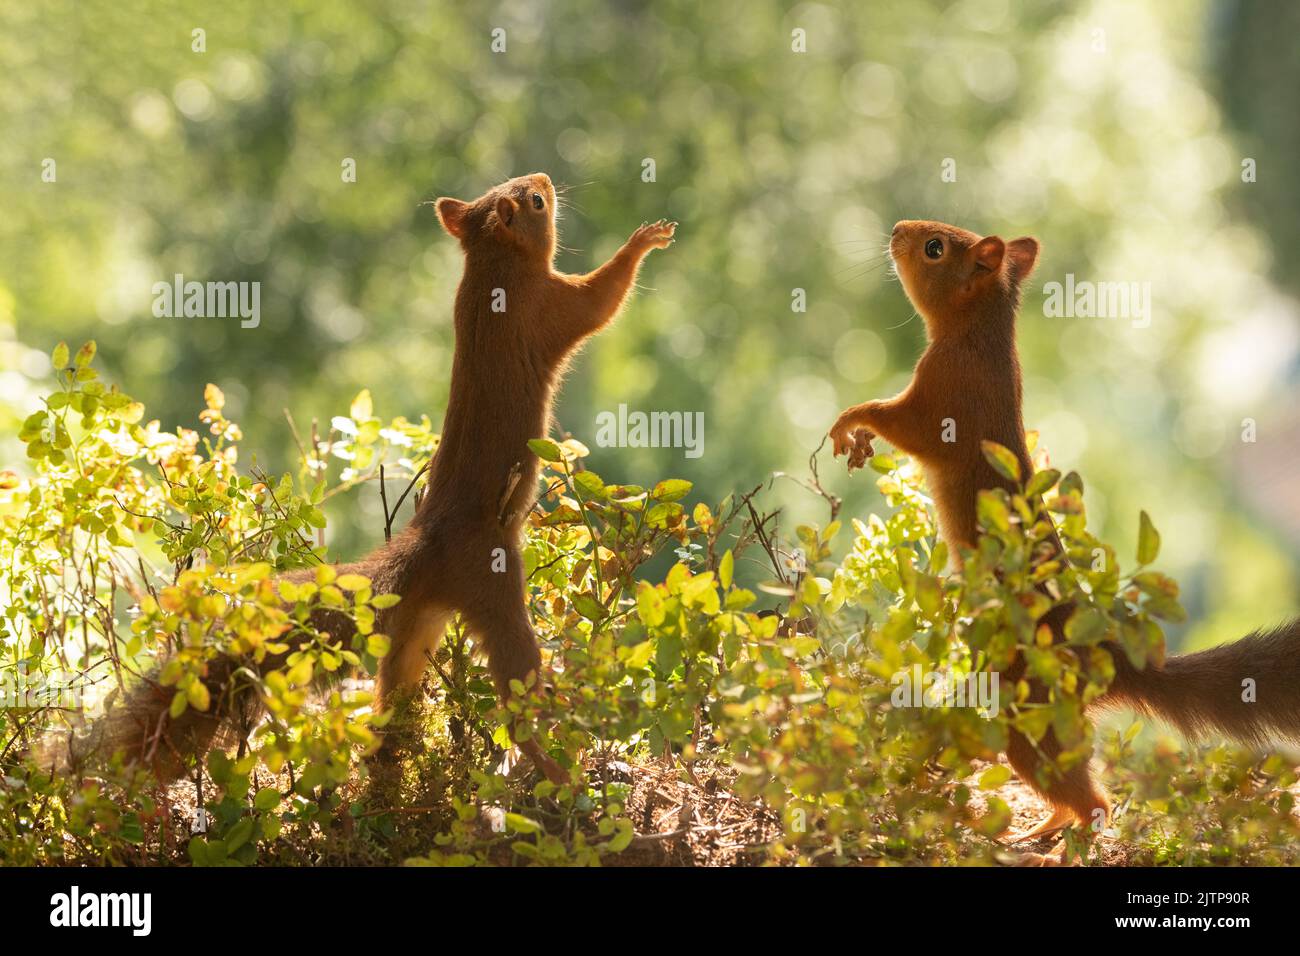 red squirrel is standing with branches with blue berry plants Stock Photo